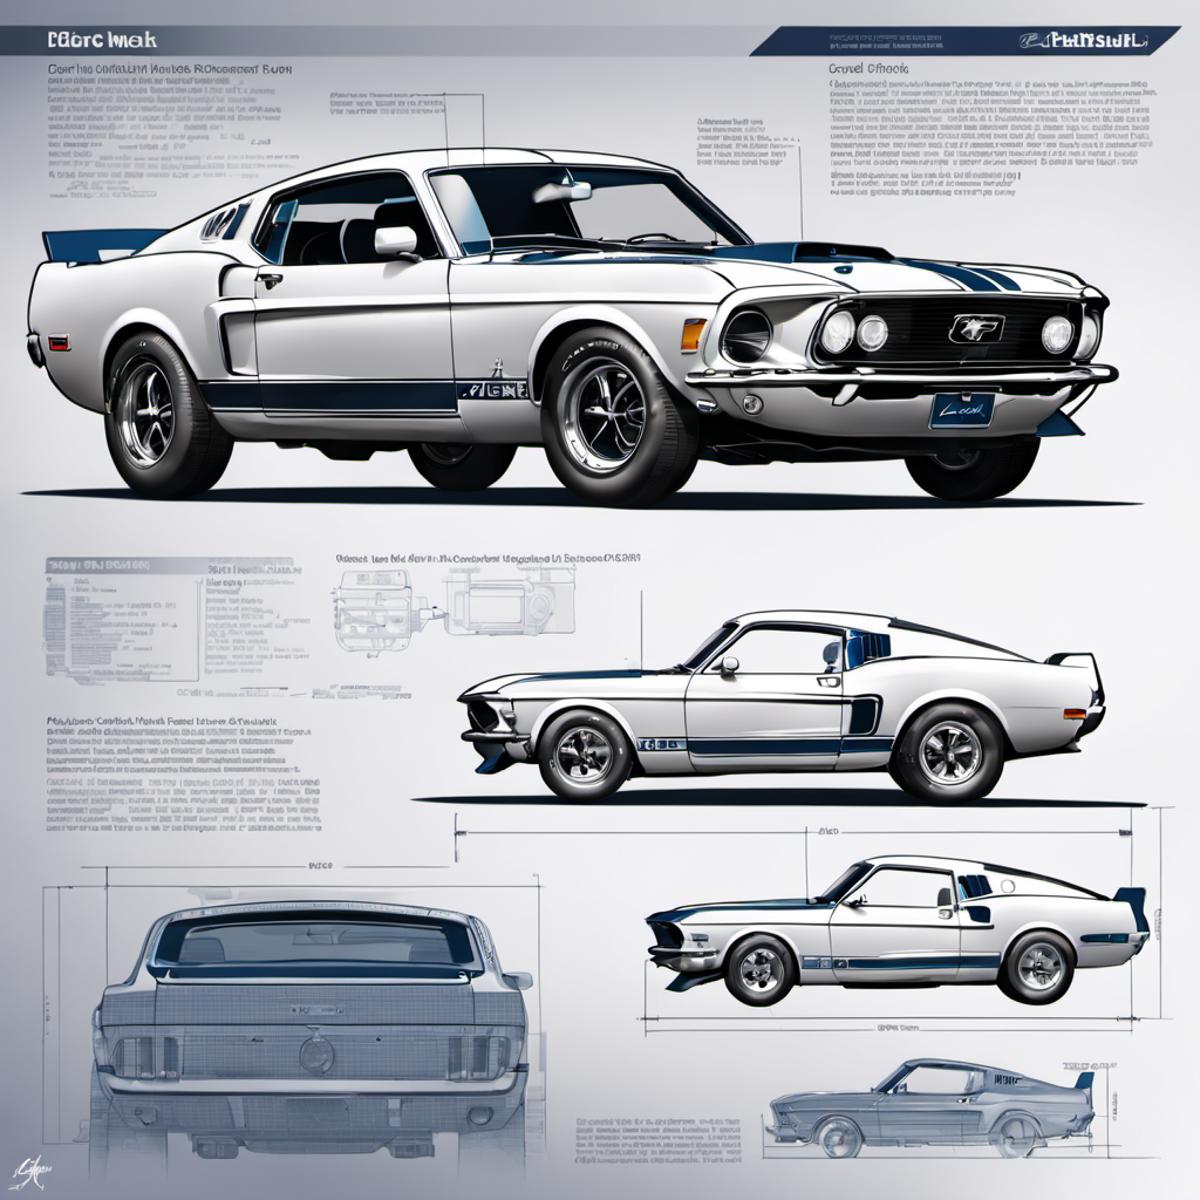 A Blue and White Mustang with a detailed illustration.